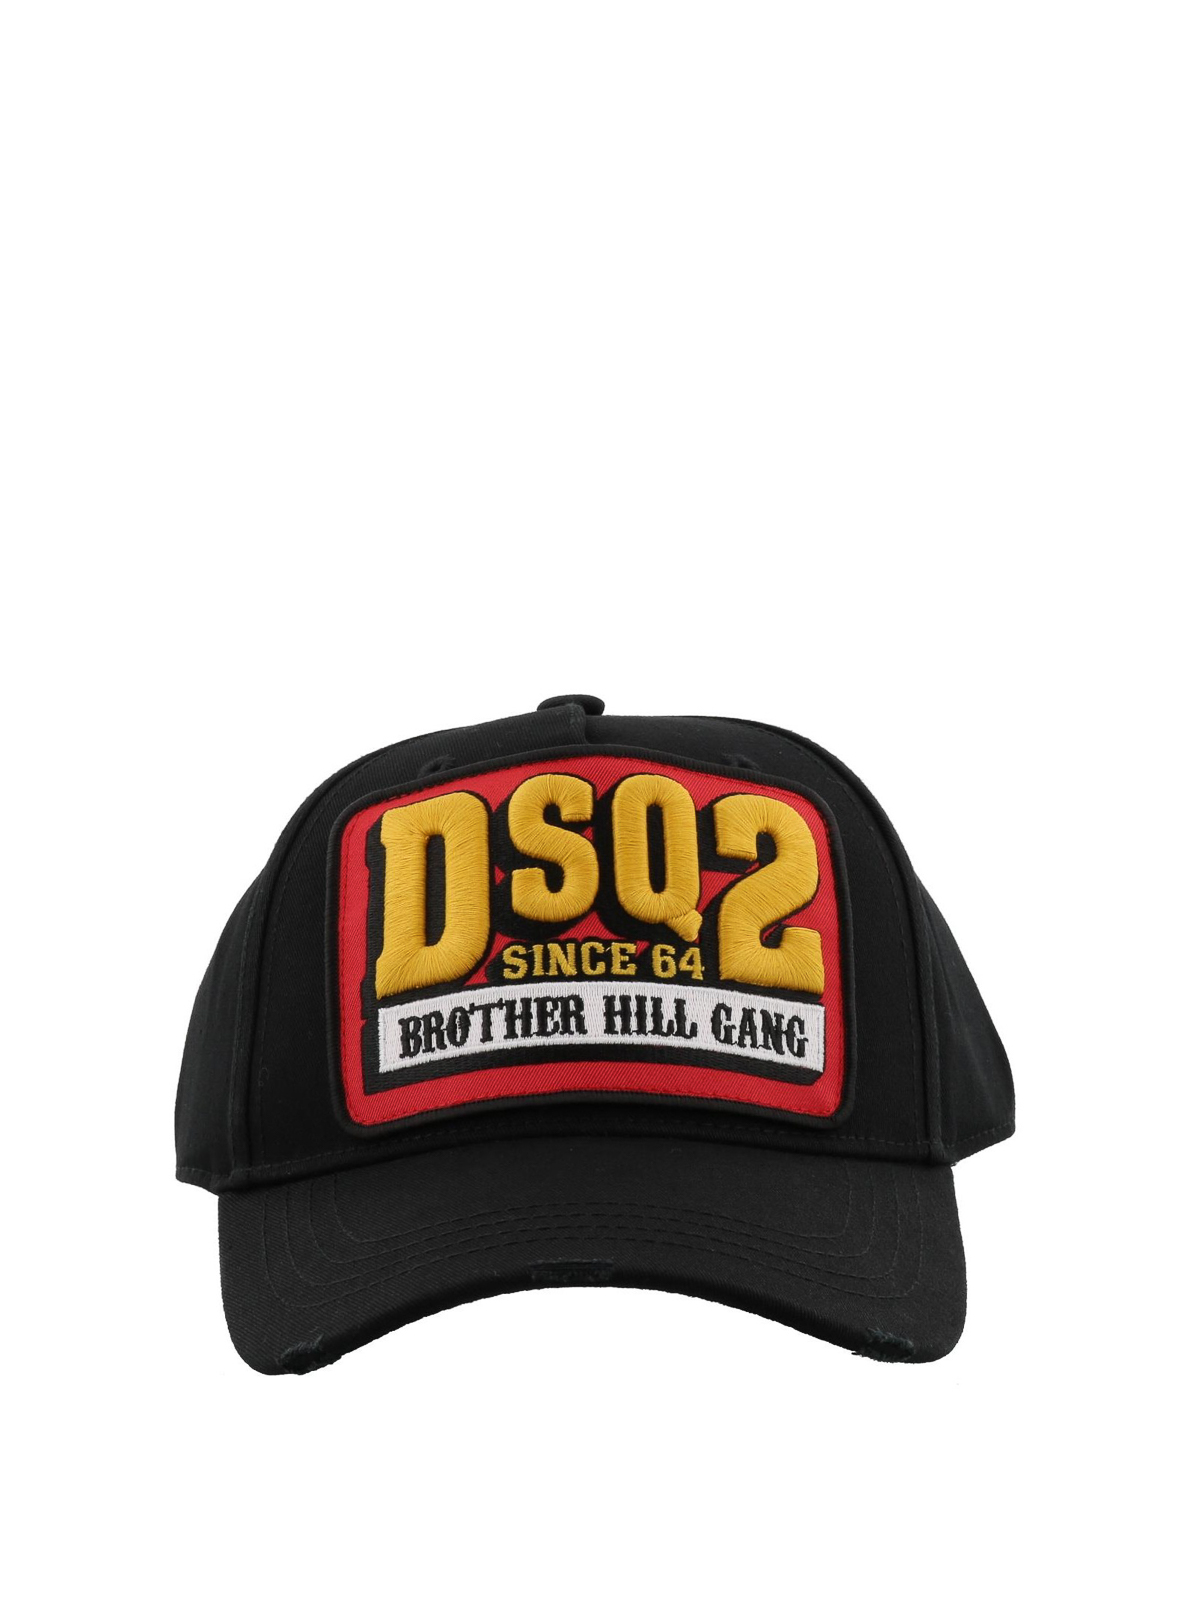 dsq2 brother hill gang